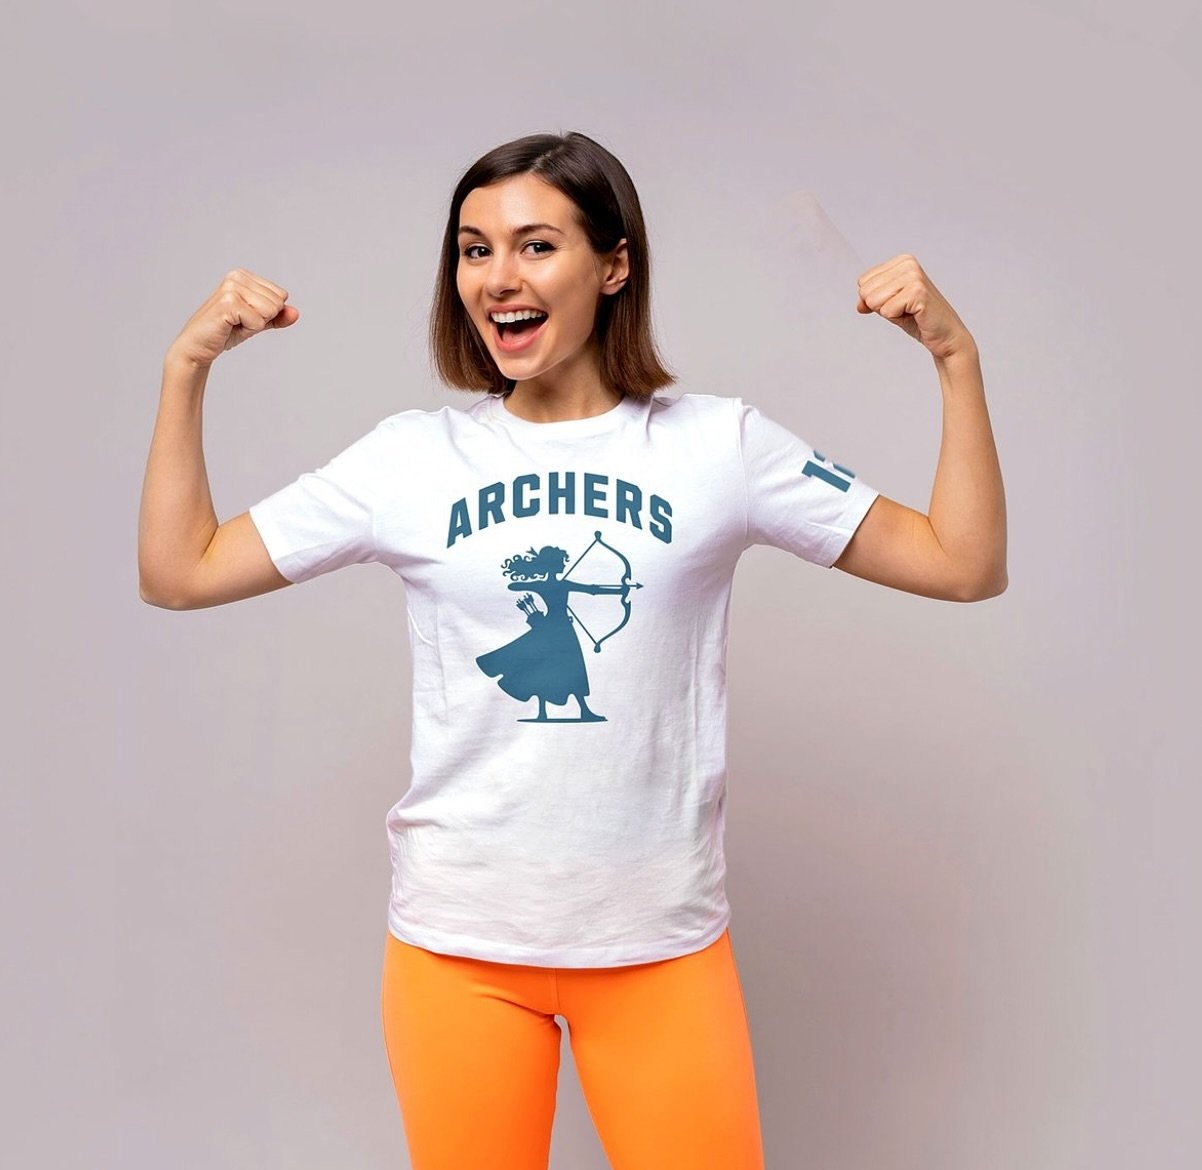 Step into a world where courage meets athleticism with our majestic Archers 12 t-shirt. Archers 12 celebrates Princess Merida. The #12 on the left arm is a nod to the year of release for Disney&rsquo;s classic animated version of the Brave (2012).

h